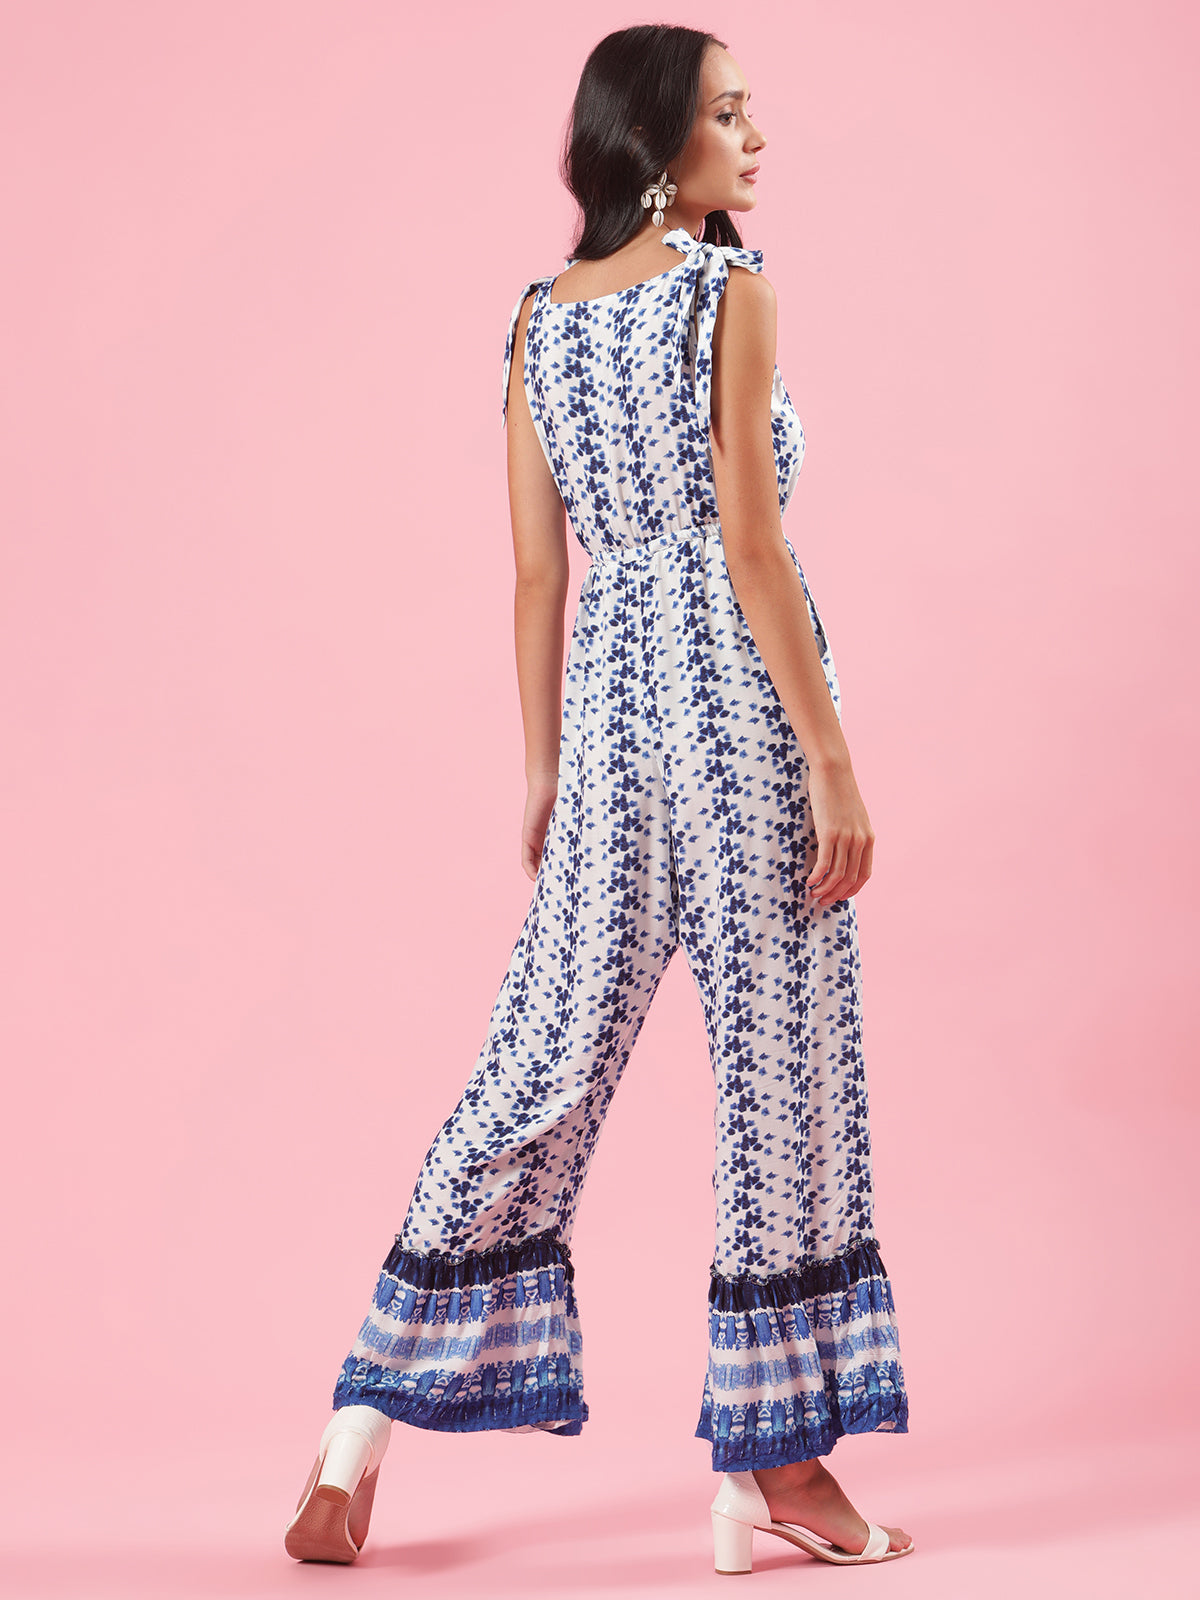 One Wish Boho Blue and White Print Womens Summer Jumpsuit with Tie Details on Shoulder